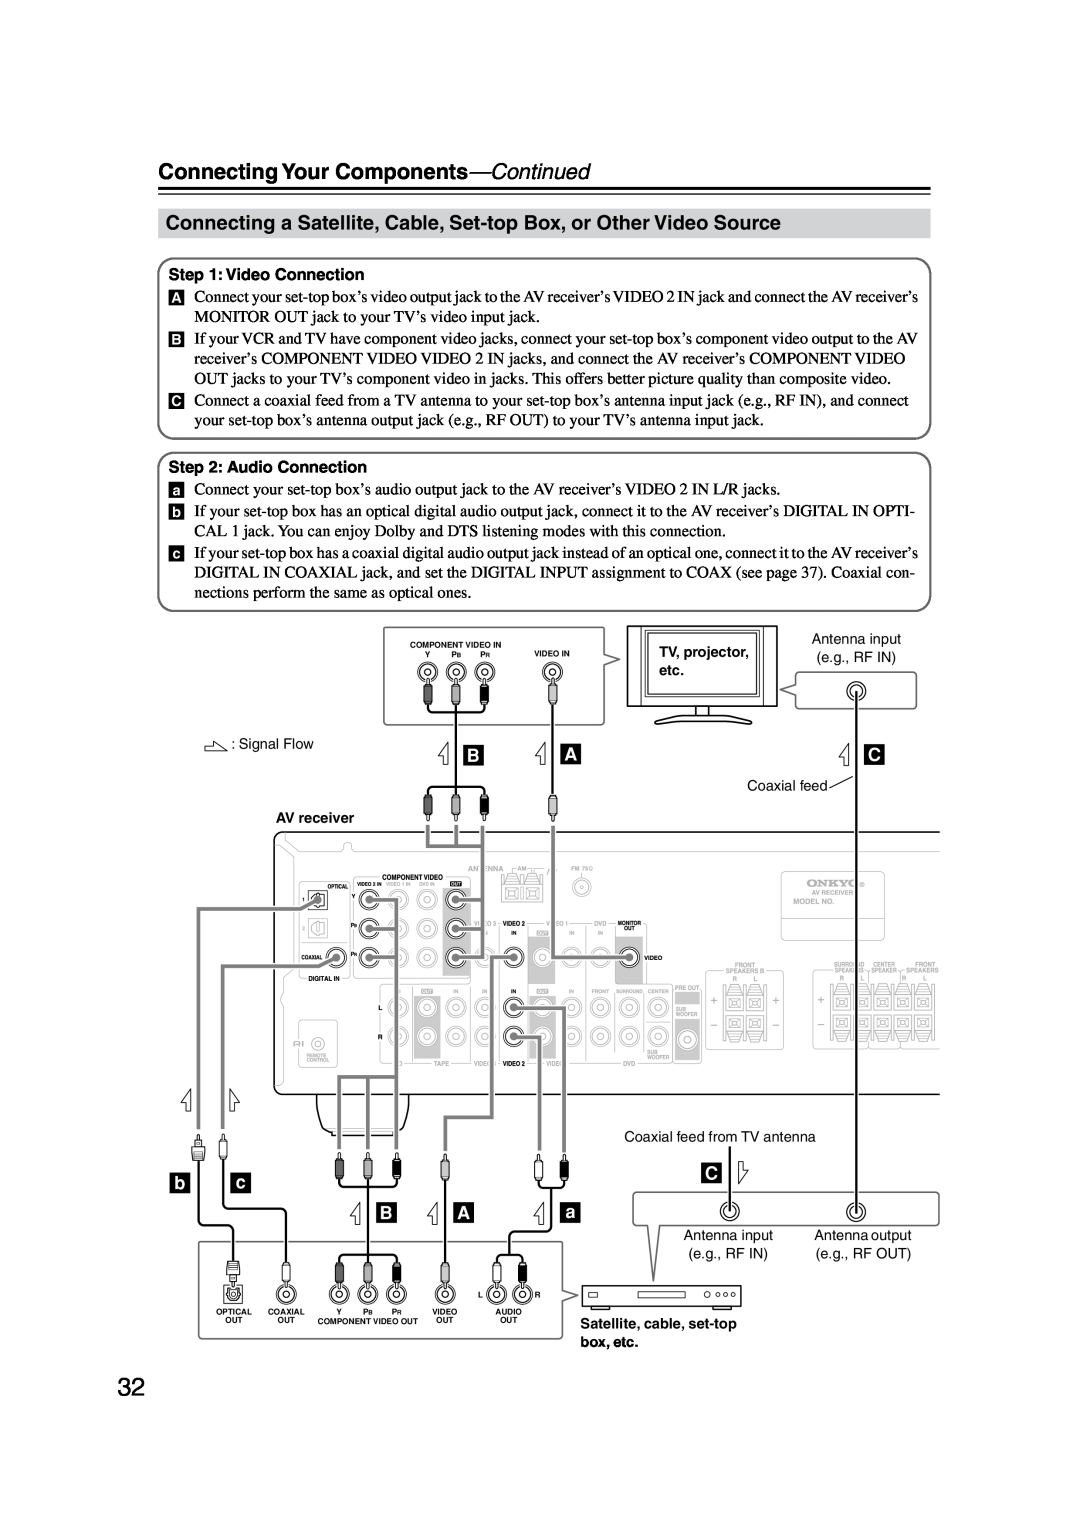 Onkyo HT-S4100 instruction manual Connecting Your Components-Continued, e.g., RF IN, Satellite, cable, set-topbox, etc 